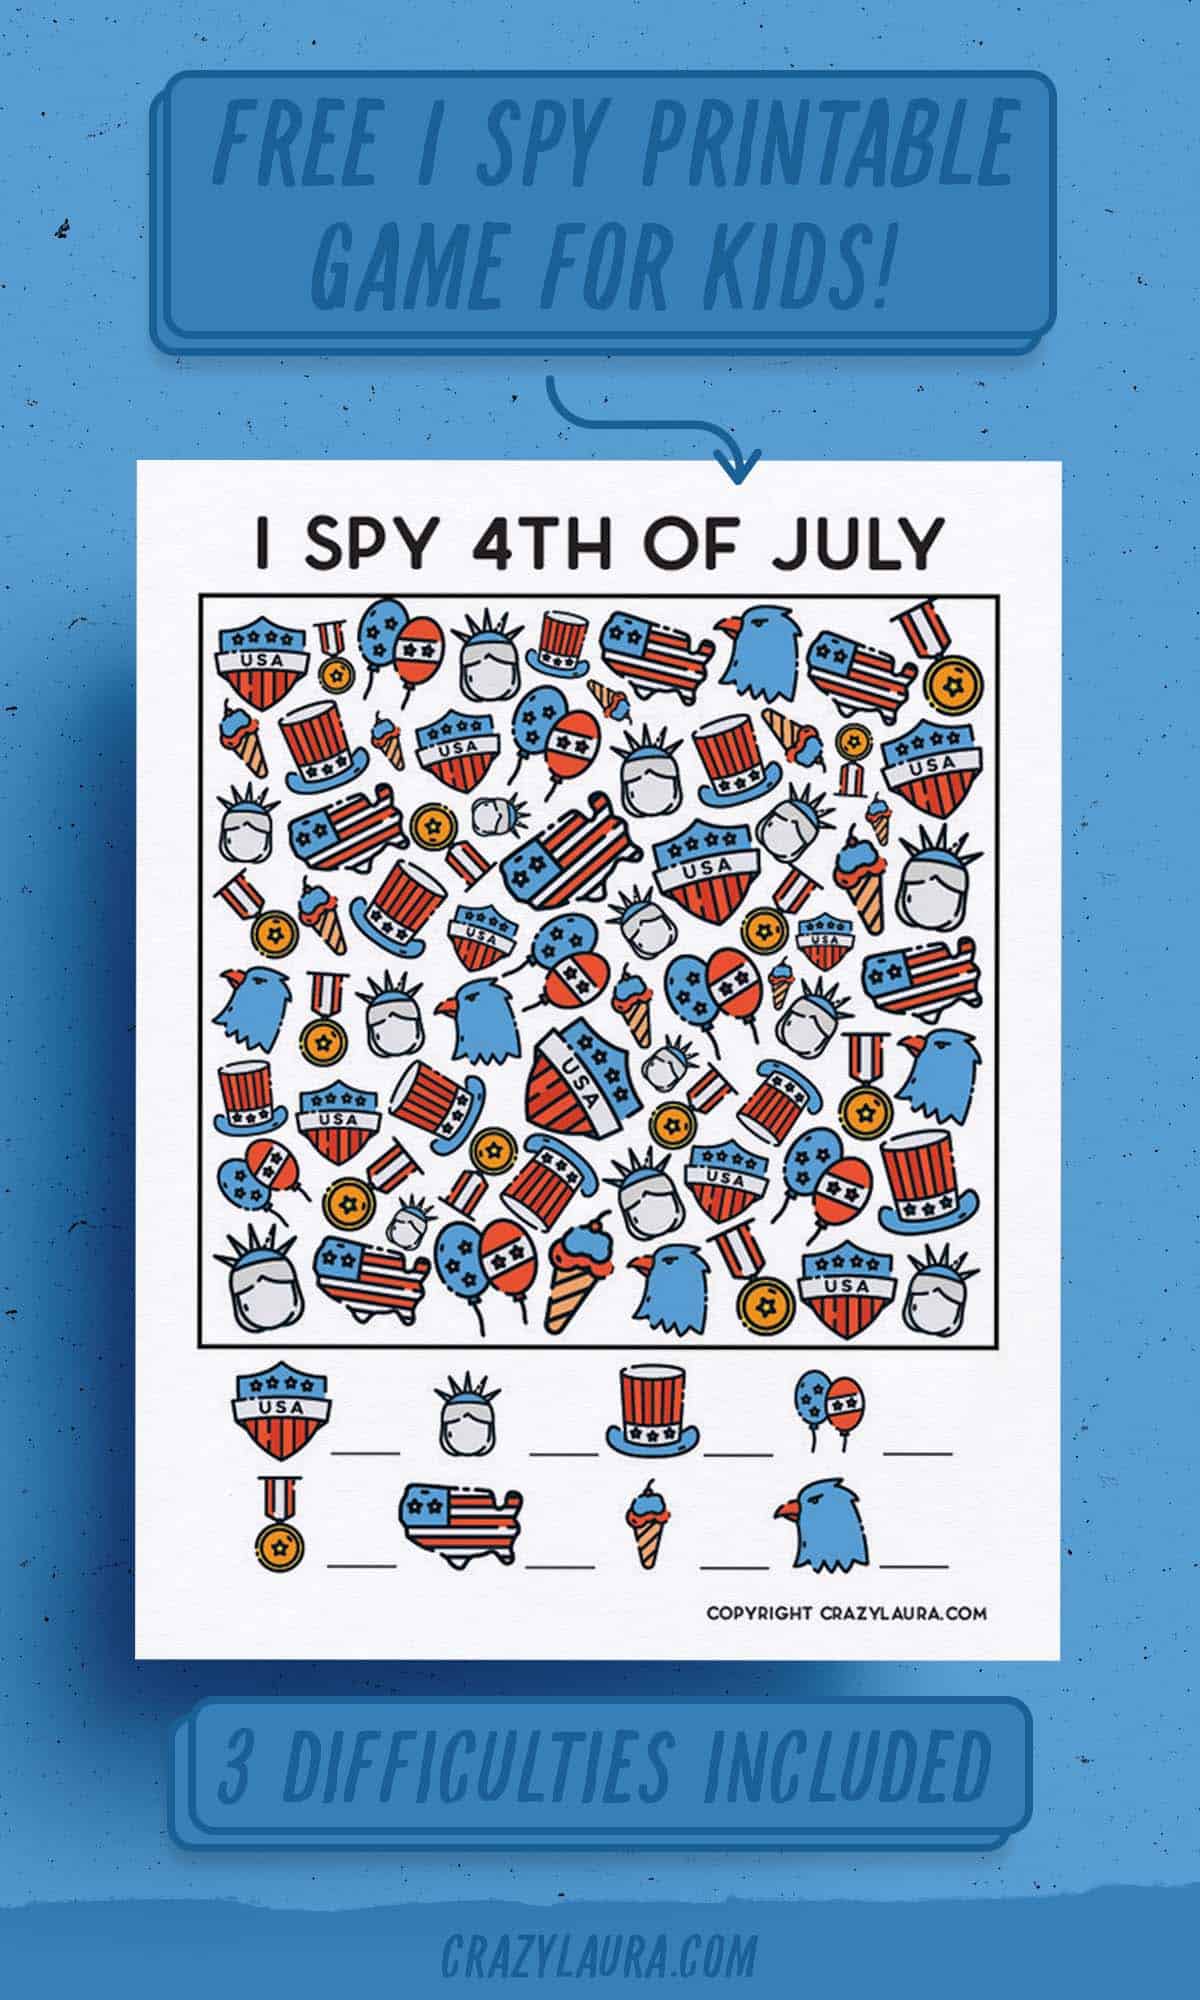 free ispy printables to download